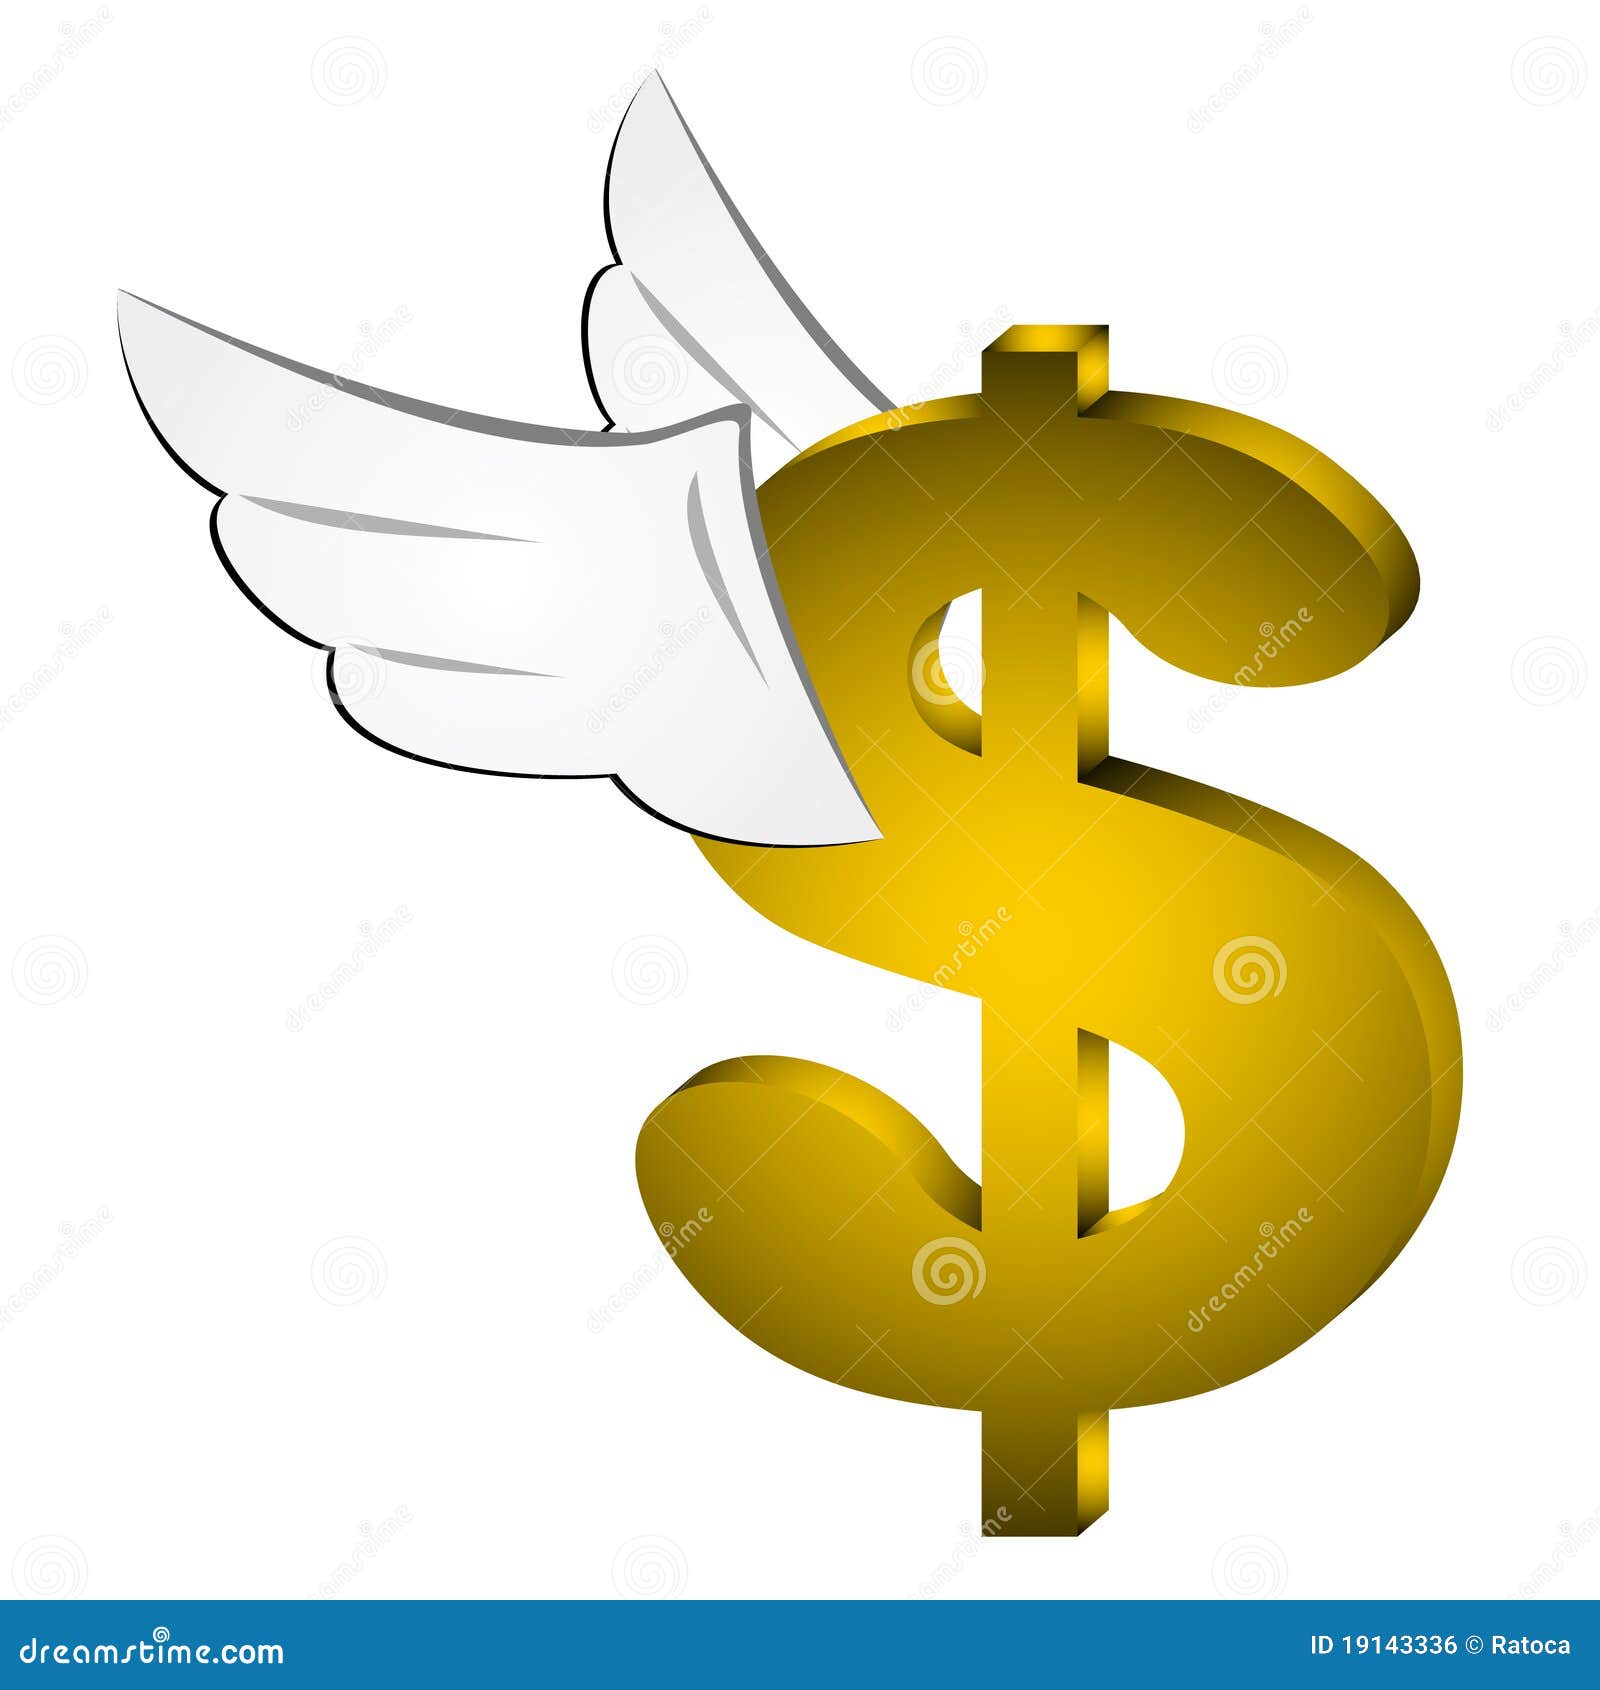 clipart flying dollar sign - photo #11